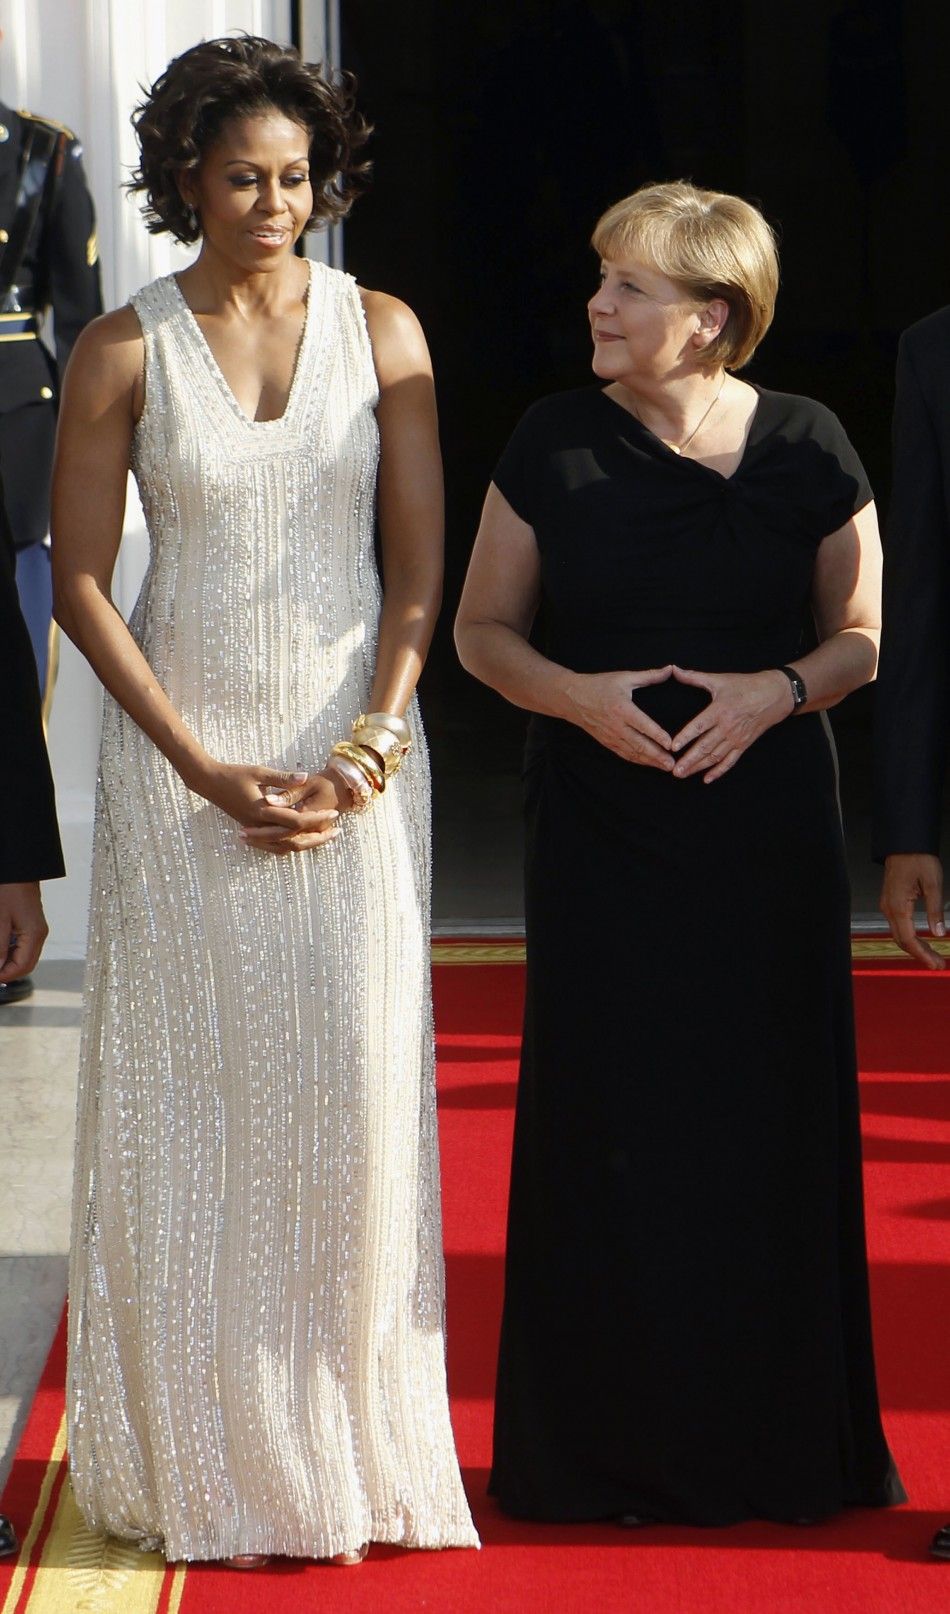 4. Michelle Obamas Top 10 Looks For the Year 2011 